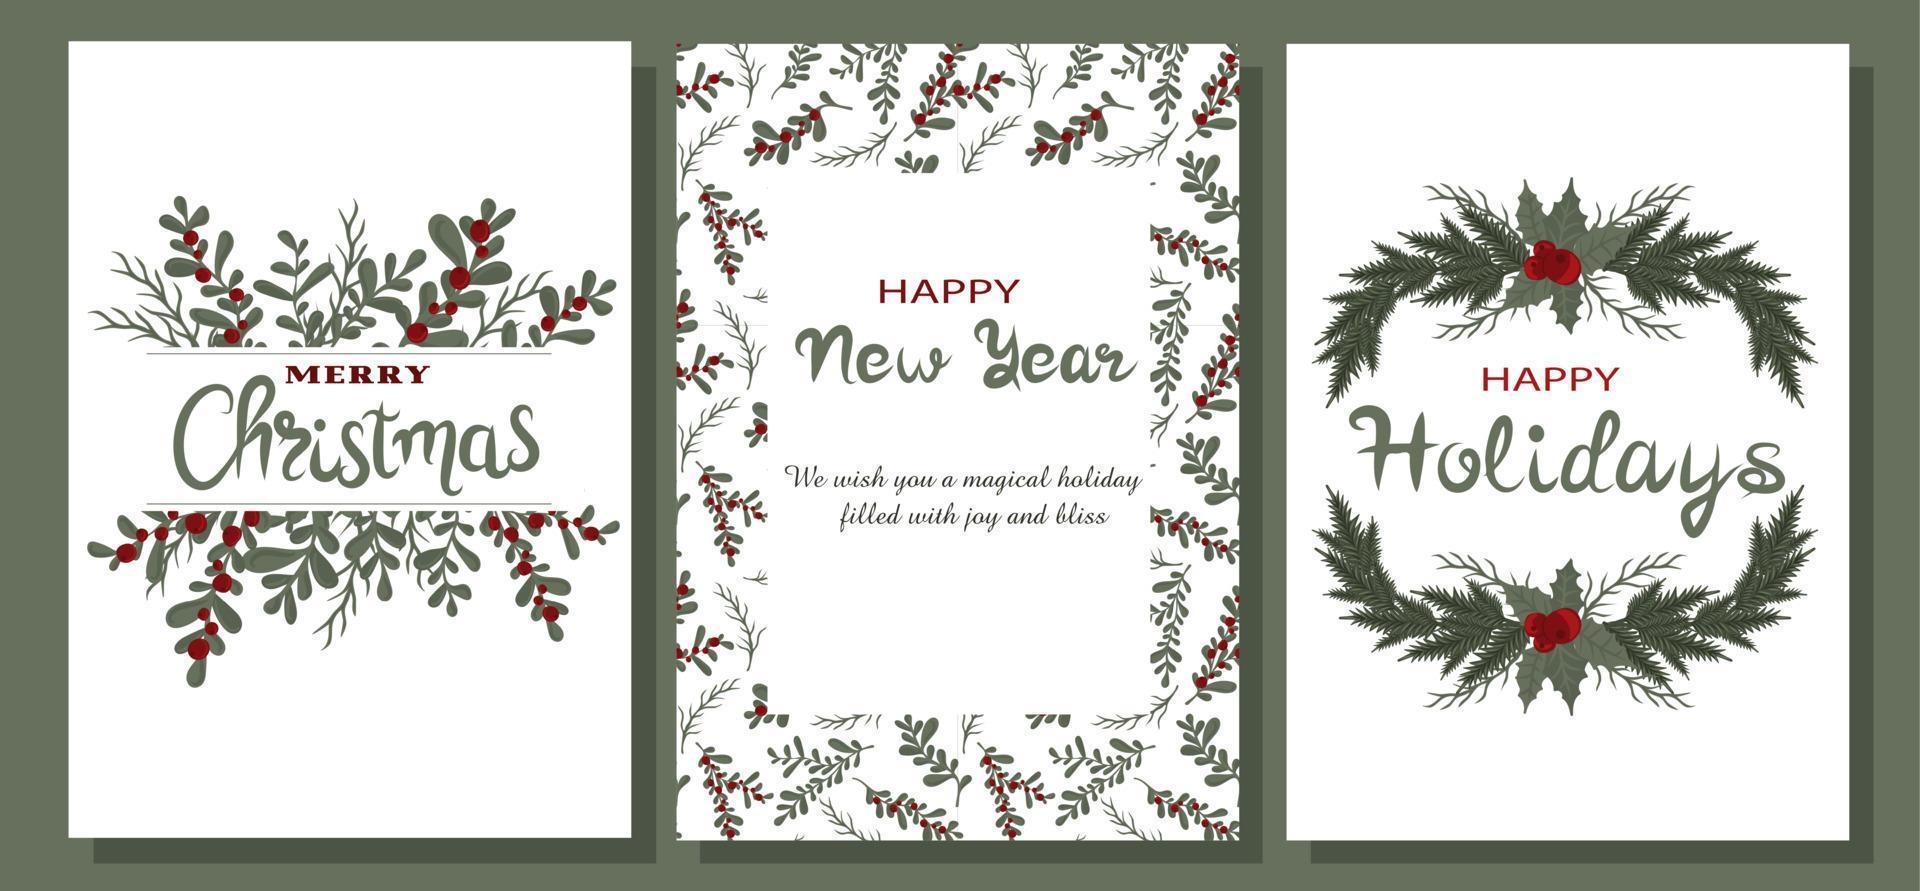 Merry Christmas and Happy new year greeting cards vector